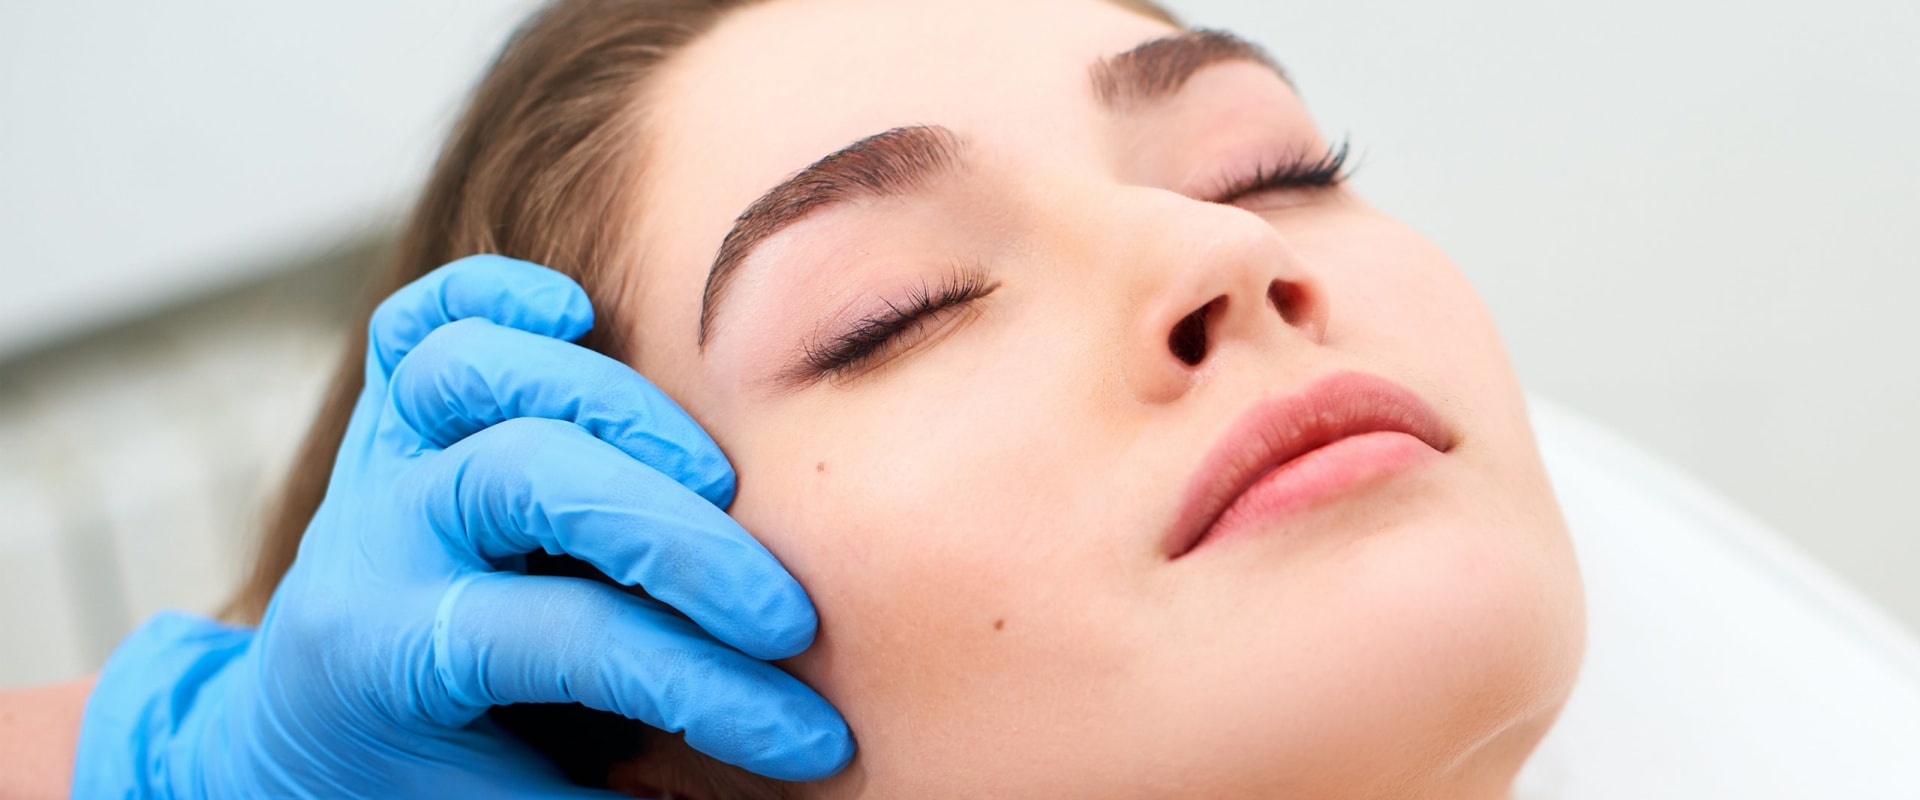 The Influence of Cleopatra Contour Plastic Surgery in Modern Beauty